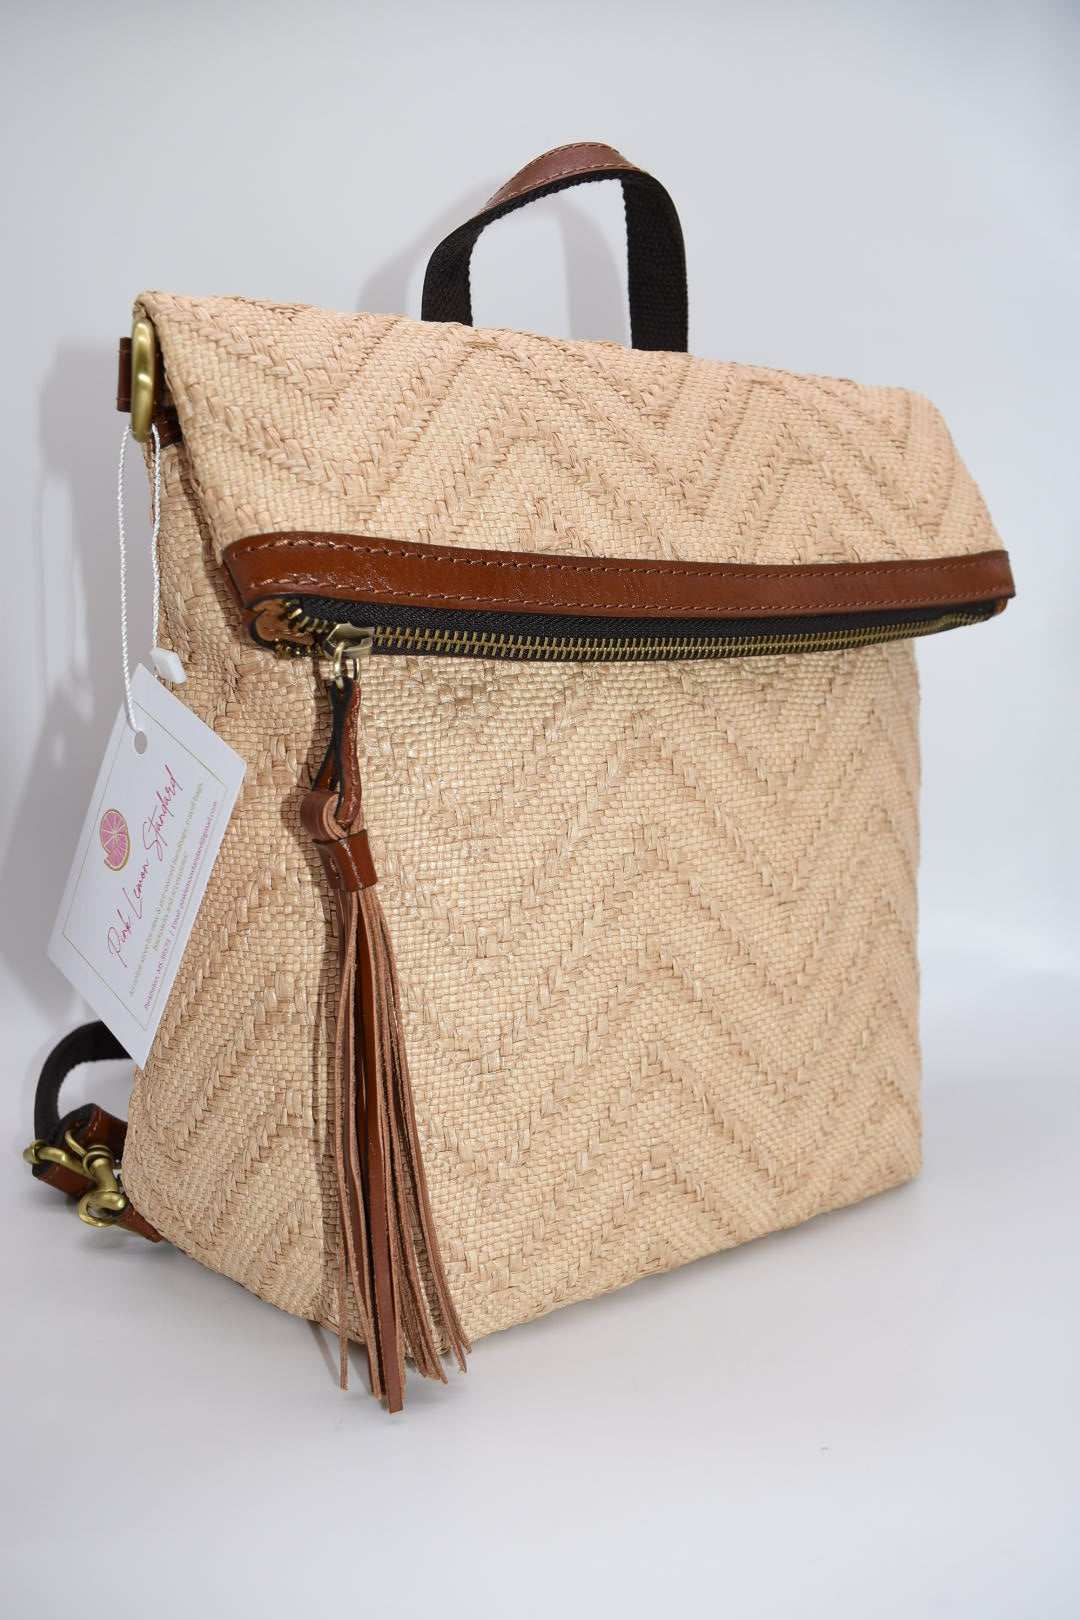 Patricia Nash Luzille Backpack in Natural Zig Zag Woven